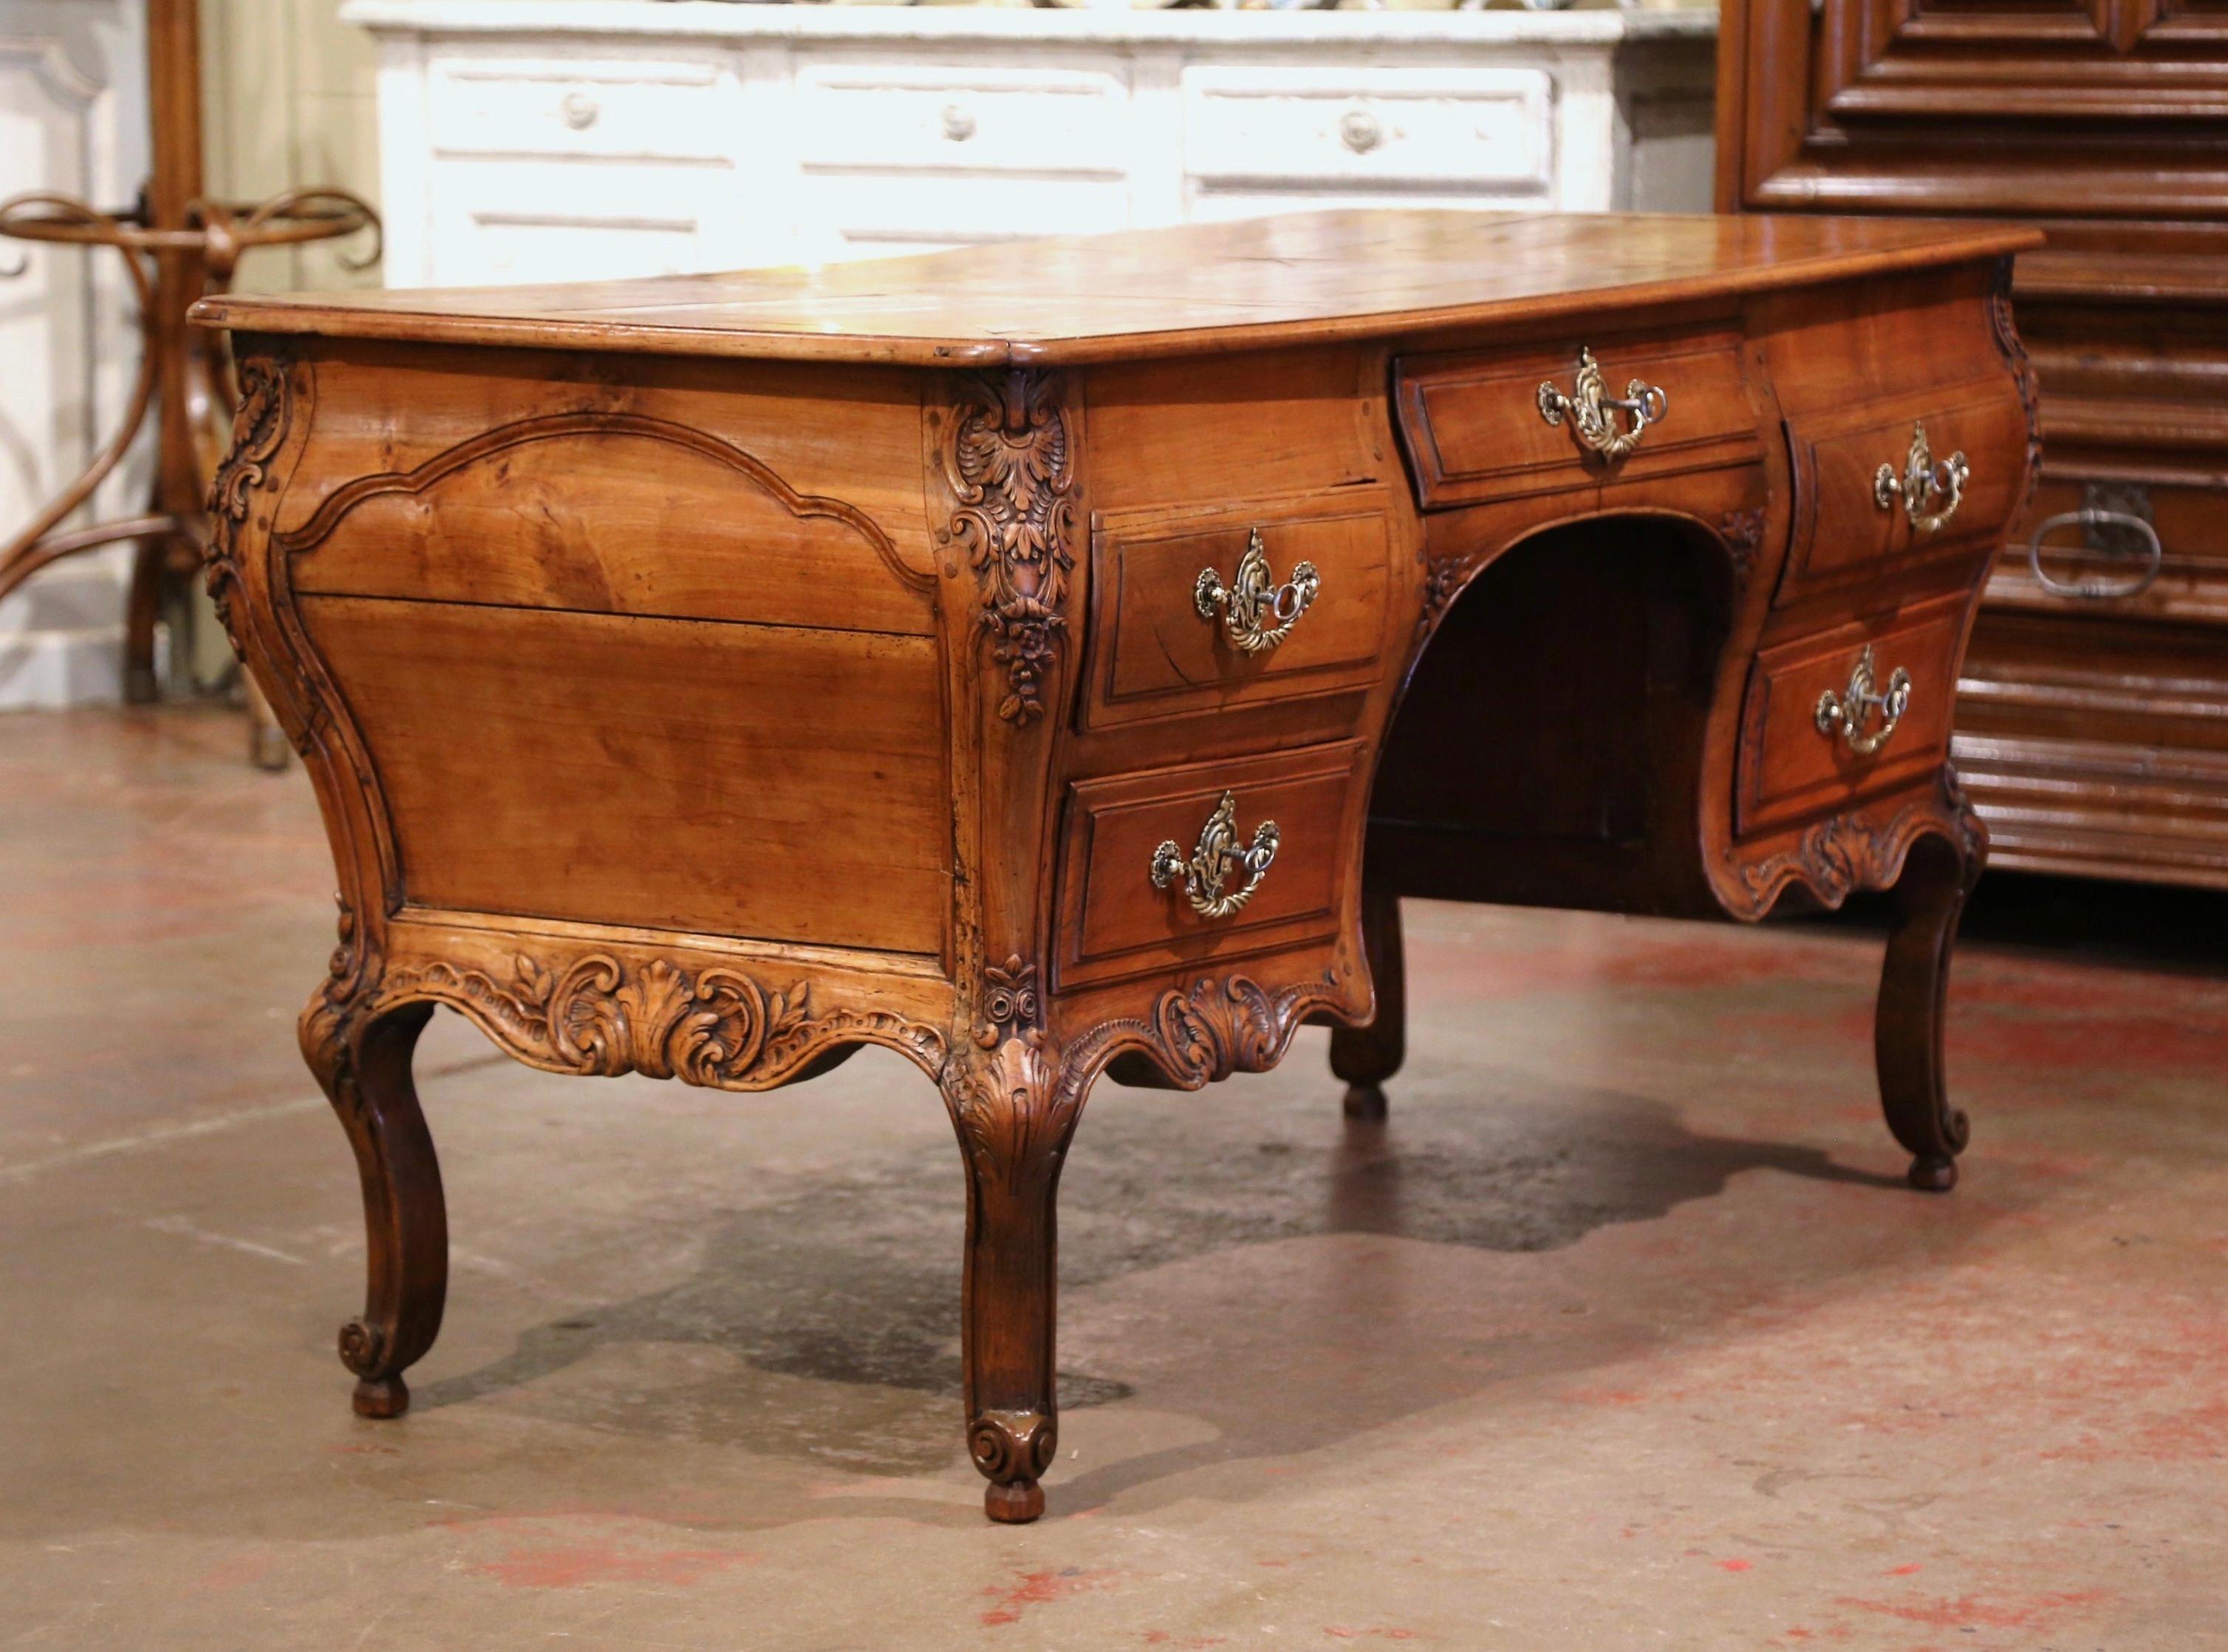 18th Century French Louis XV Carved Serpentine Cherry Desk with Parquetry Top For Sale 2